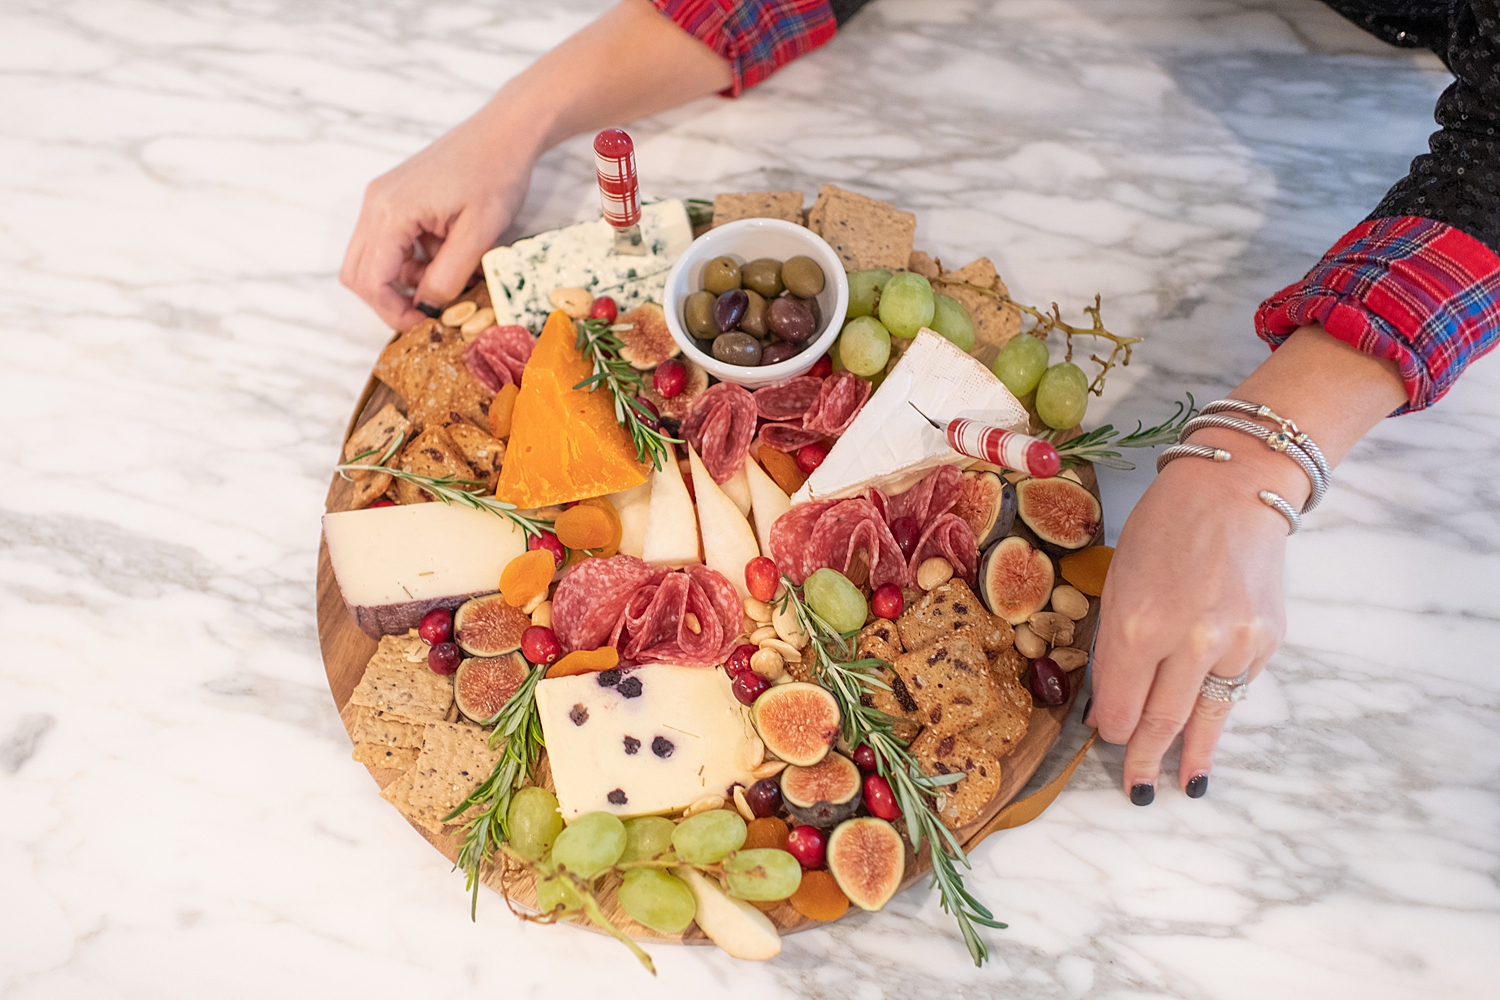 Top Houston life and style blogger, Fancy Ashley, features her tips to prepare the perfect Charcuterie Tray for the Holidays: image of a woman holding a festive charcuterie tray